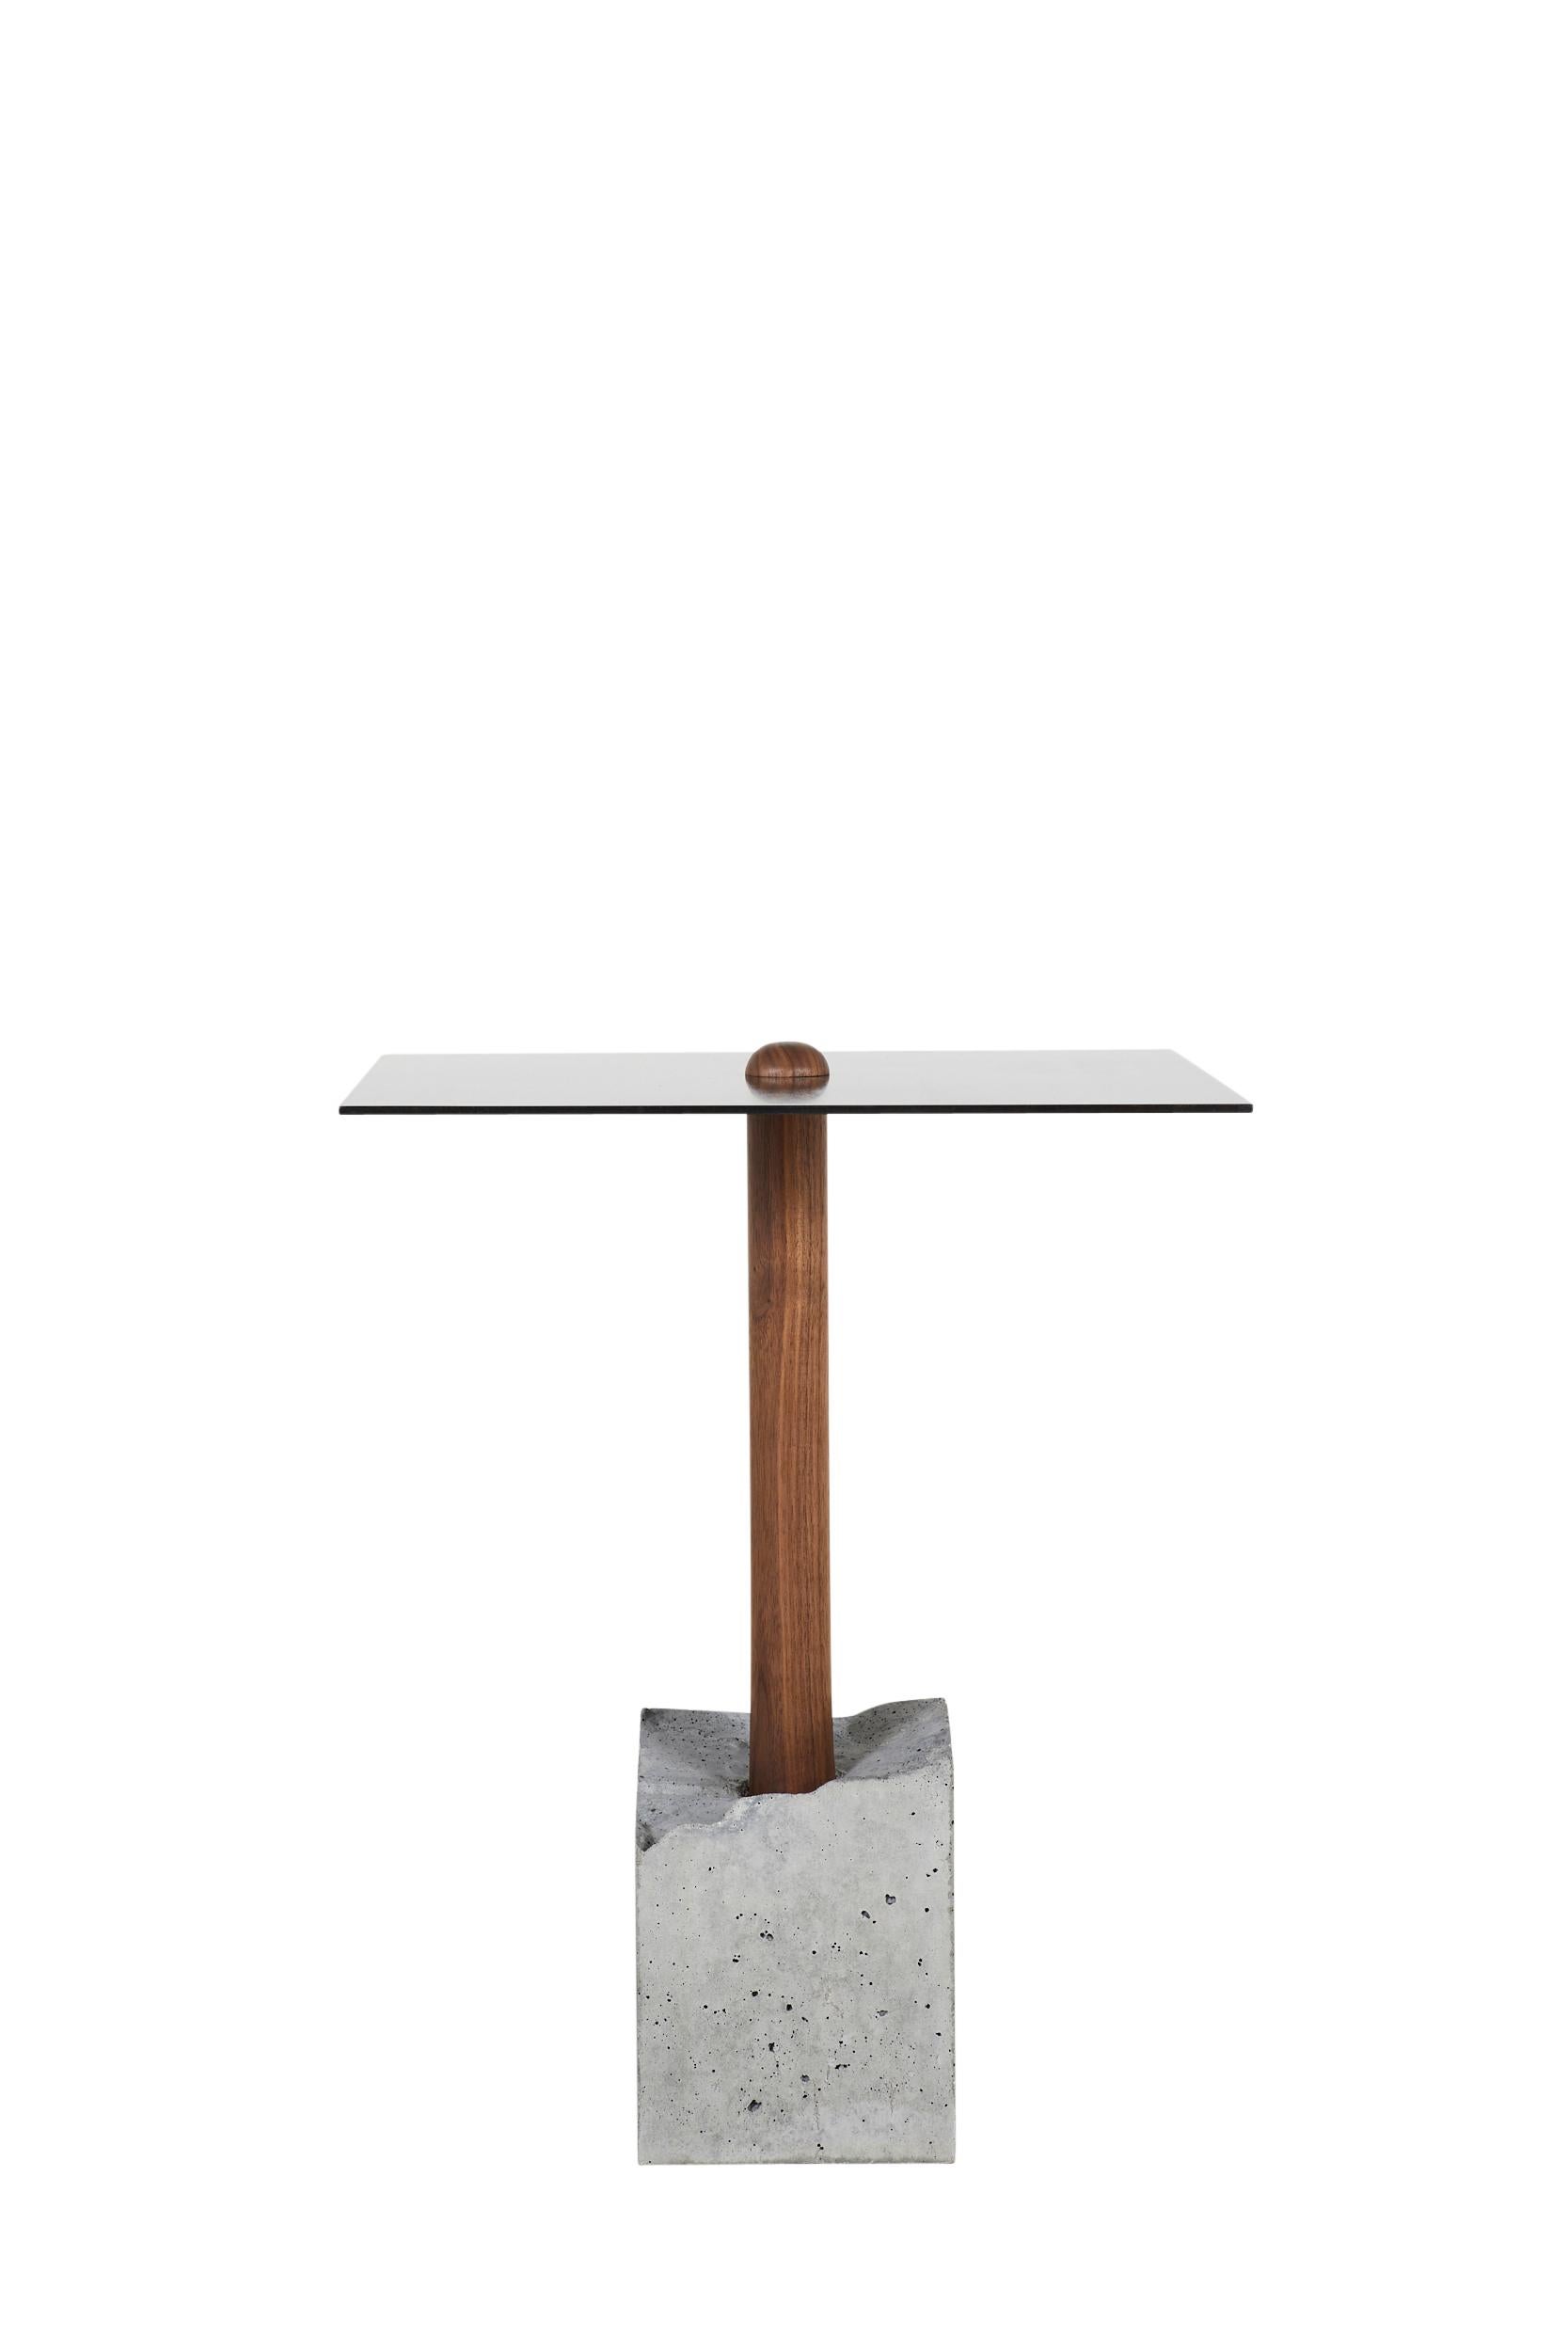 This simple and elegant design is composed of a hand-turned upright piece of wood that is cast into a concrete base. Shown in walnut, the concrete base is a rough 